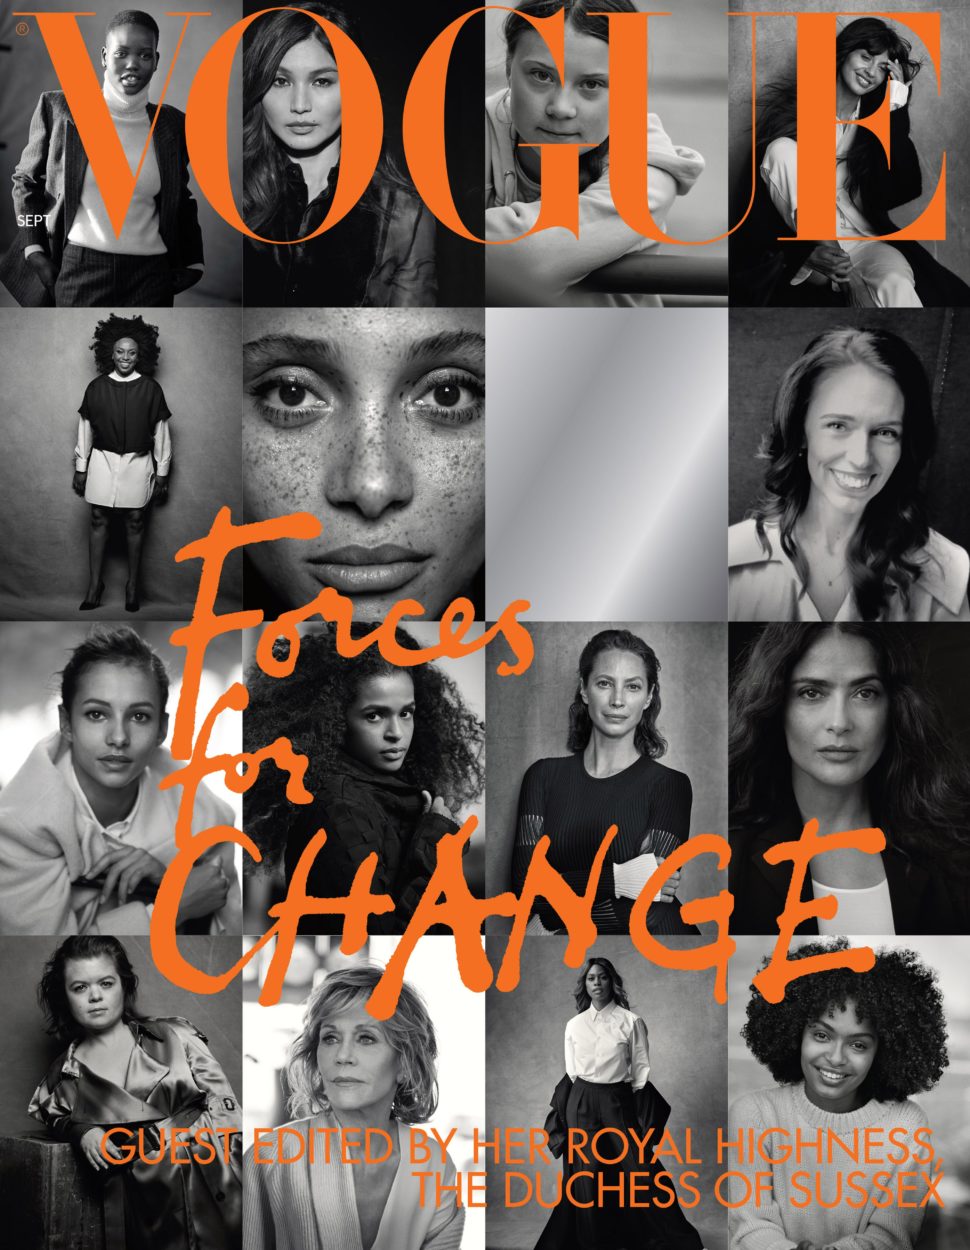 British Vogue's September Issue cover, guest-edited by Megan Markle